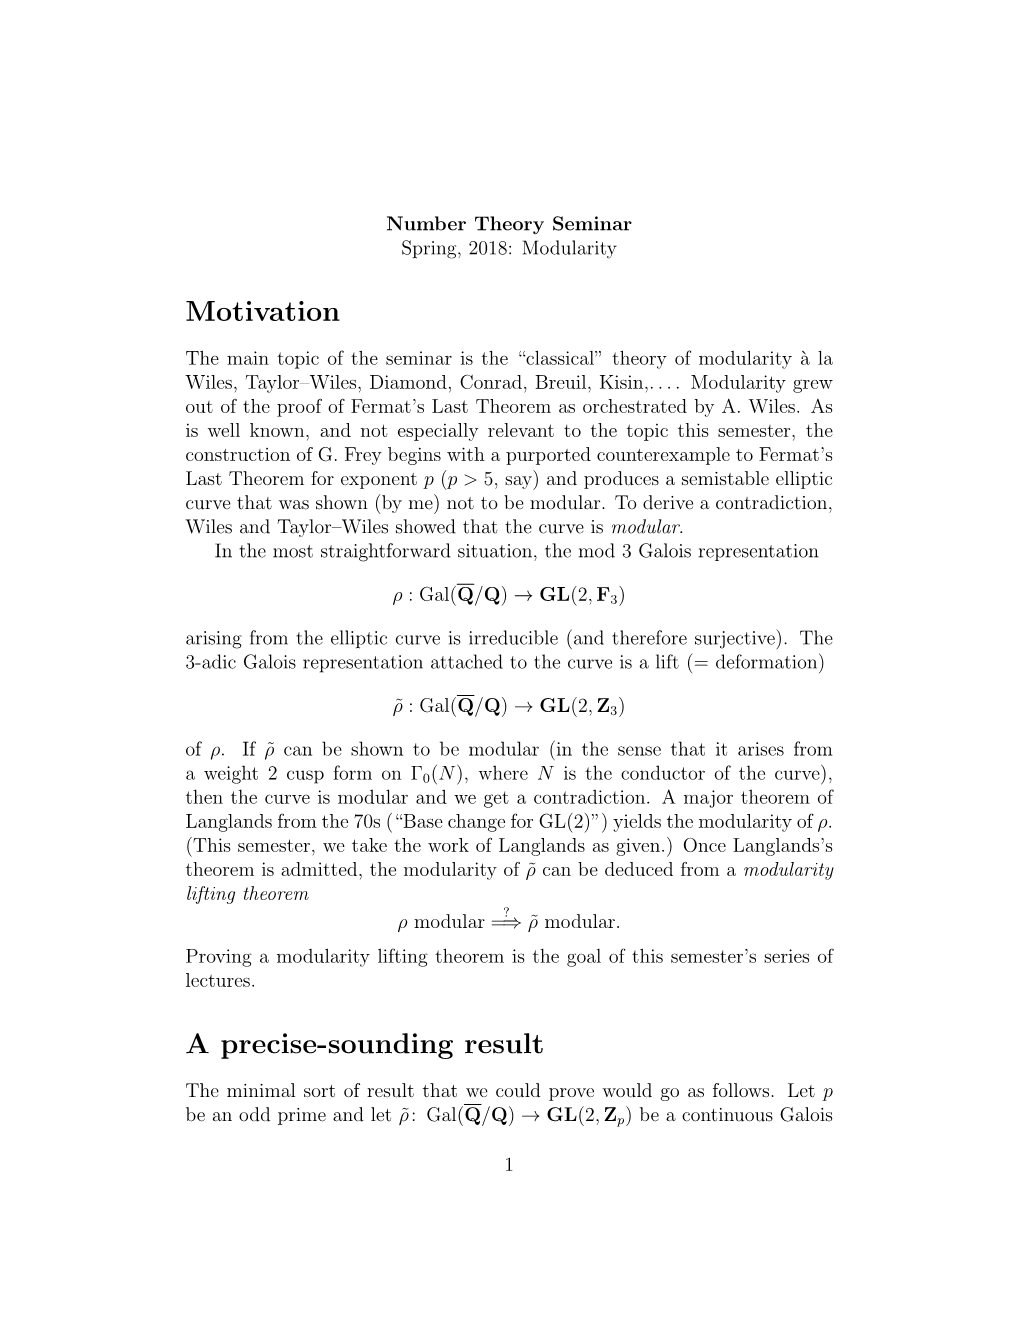 Deformation Theory of Galois Representations